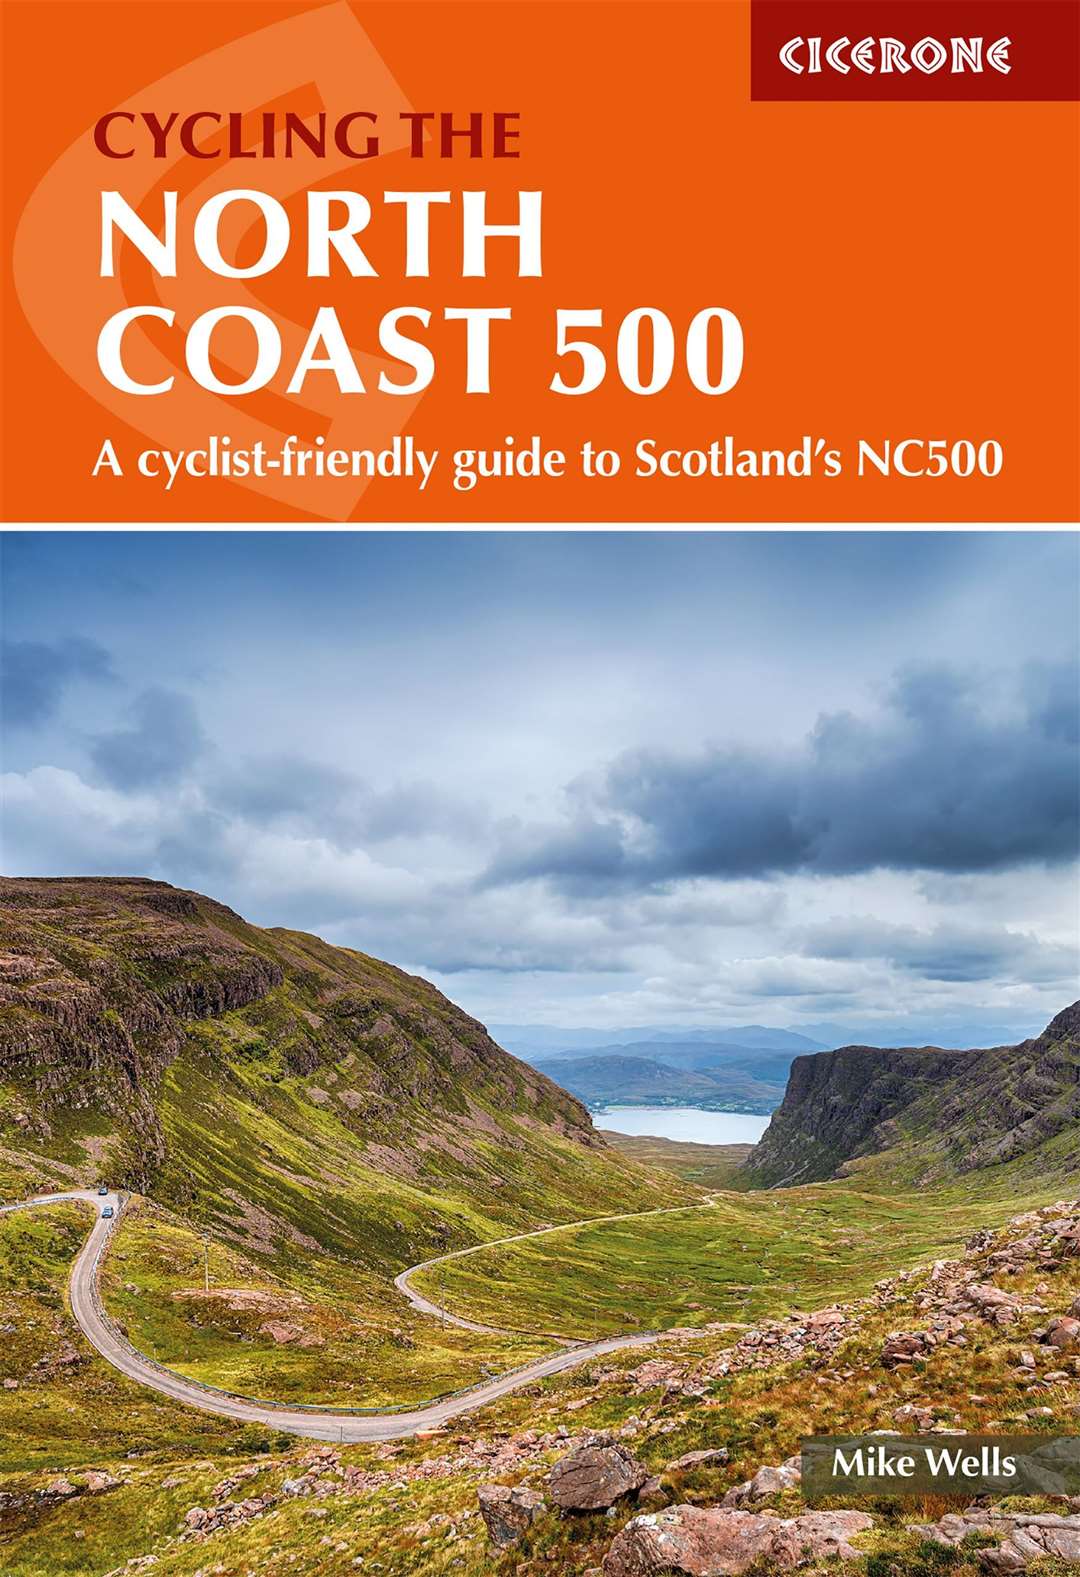 Cycling the North Coast 500 by Mike Wells.